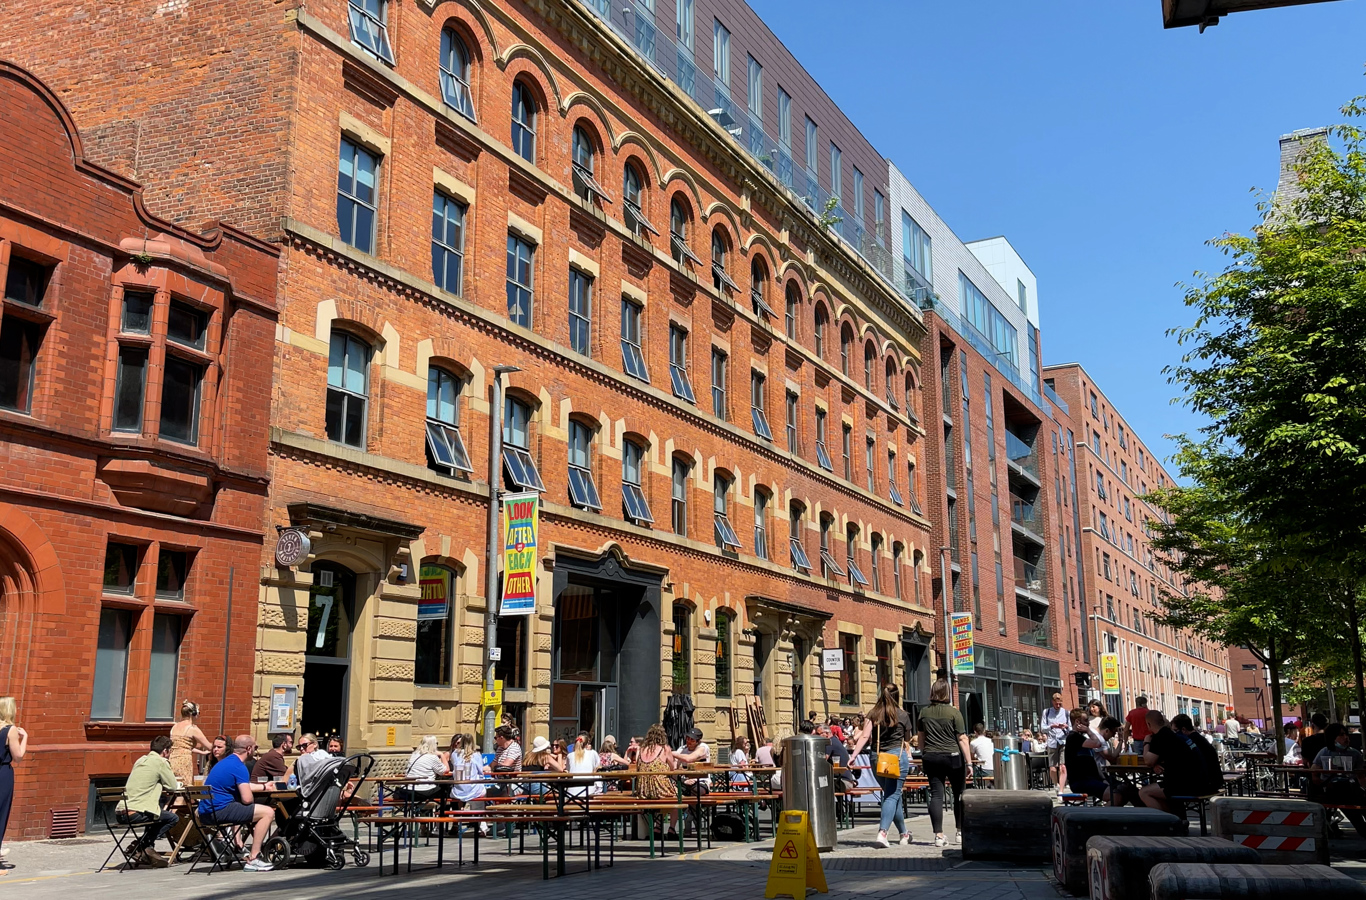 Ice Plant on Cutting Room Square with people eating and drinking outside in the sun